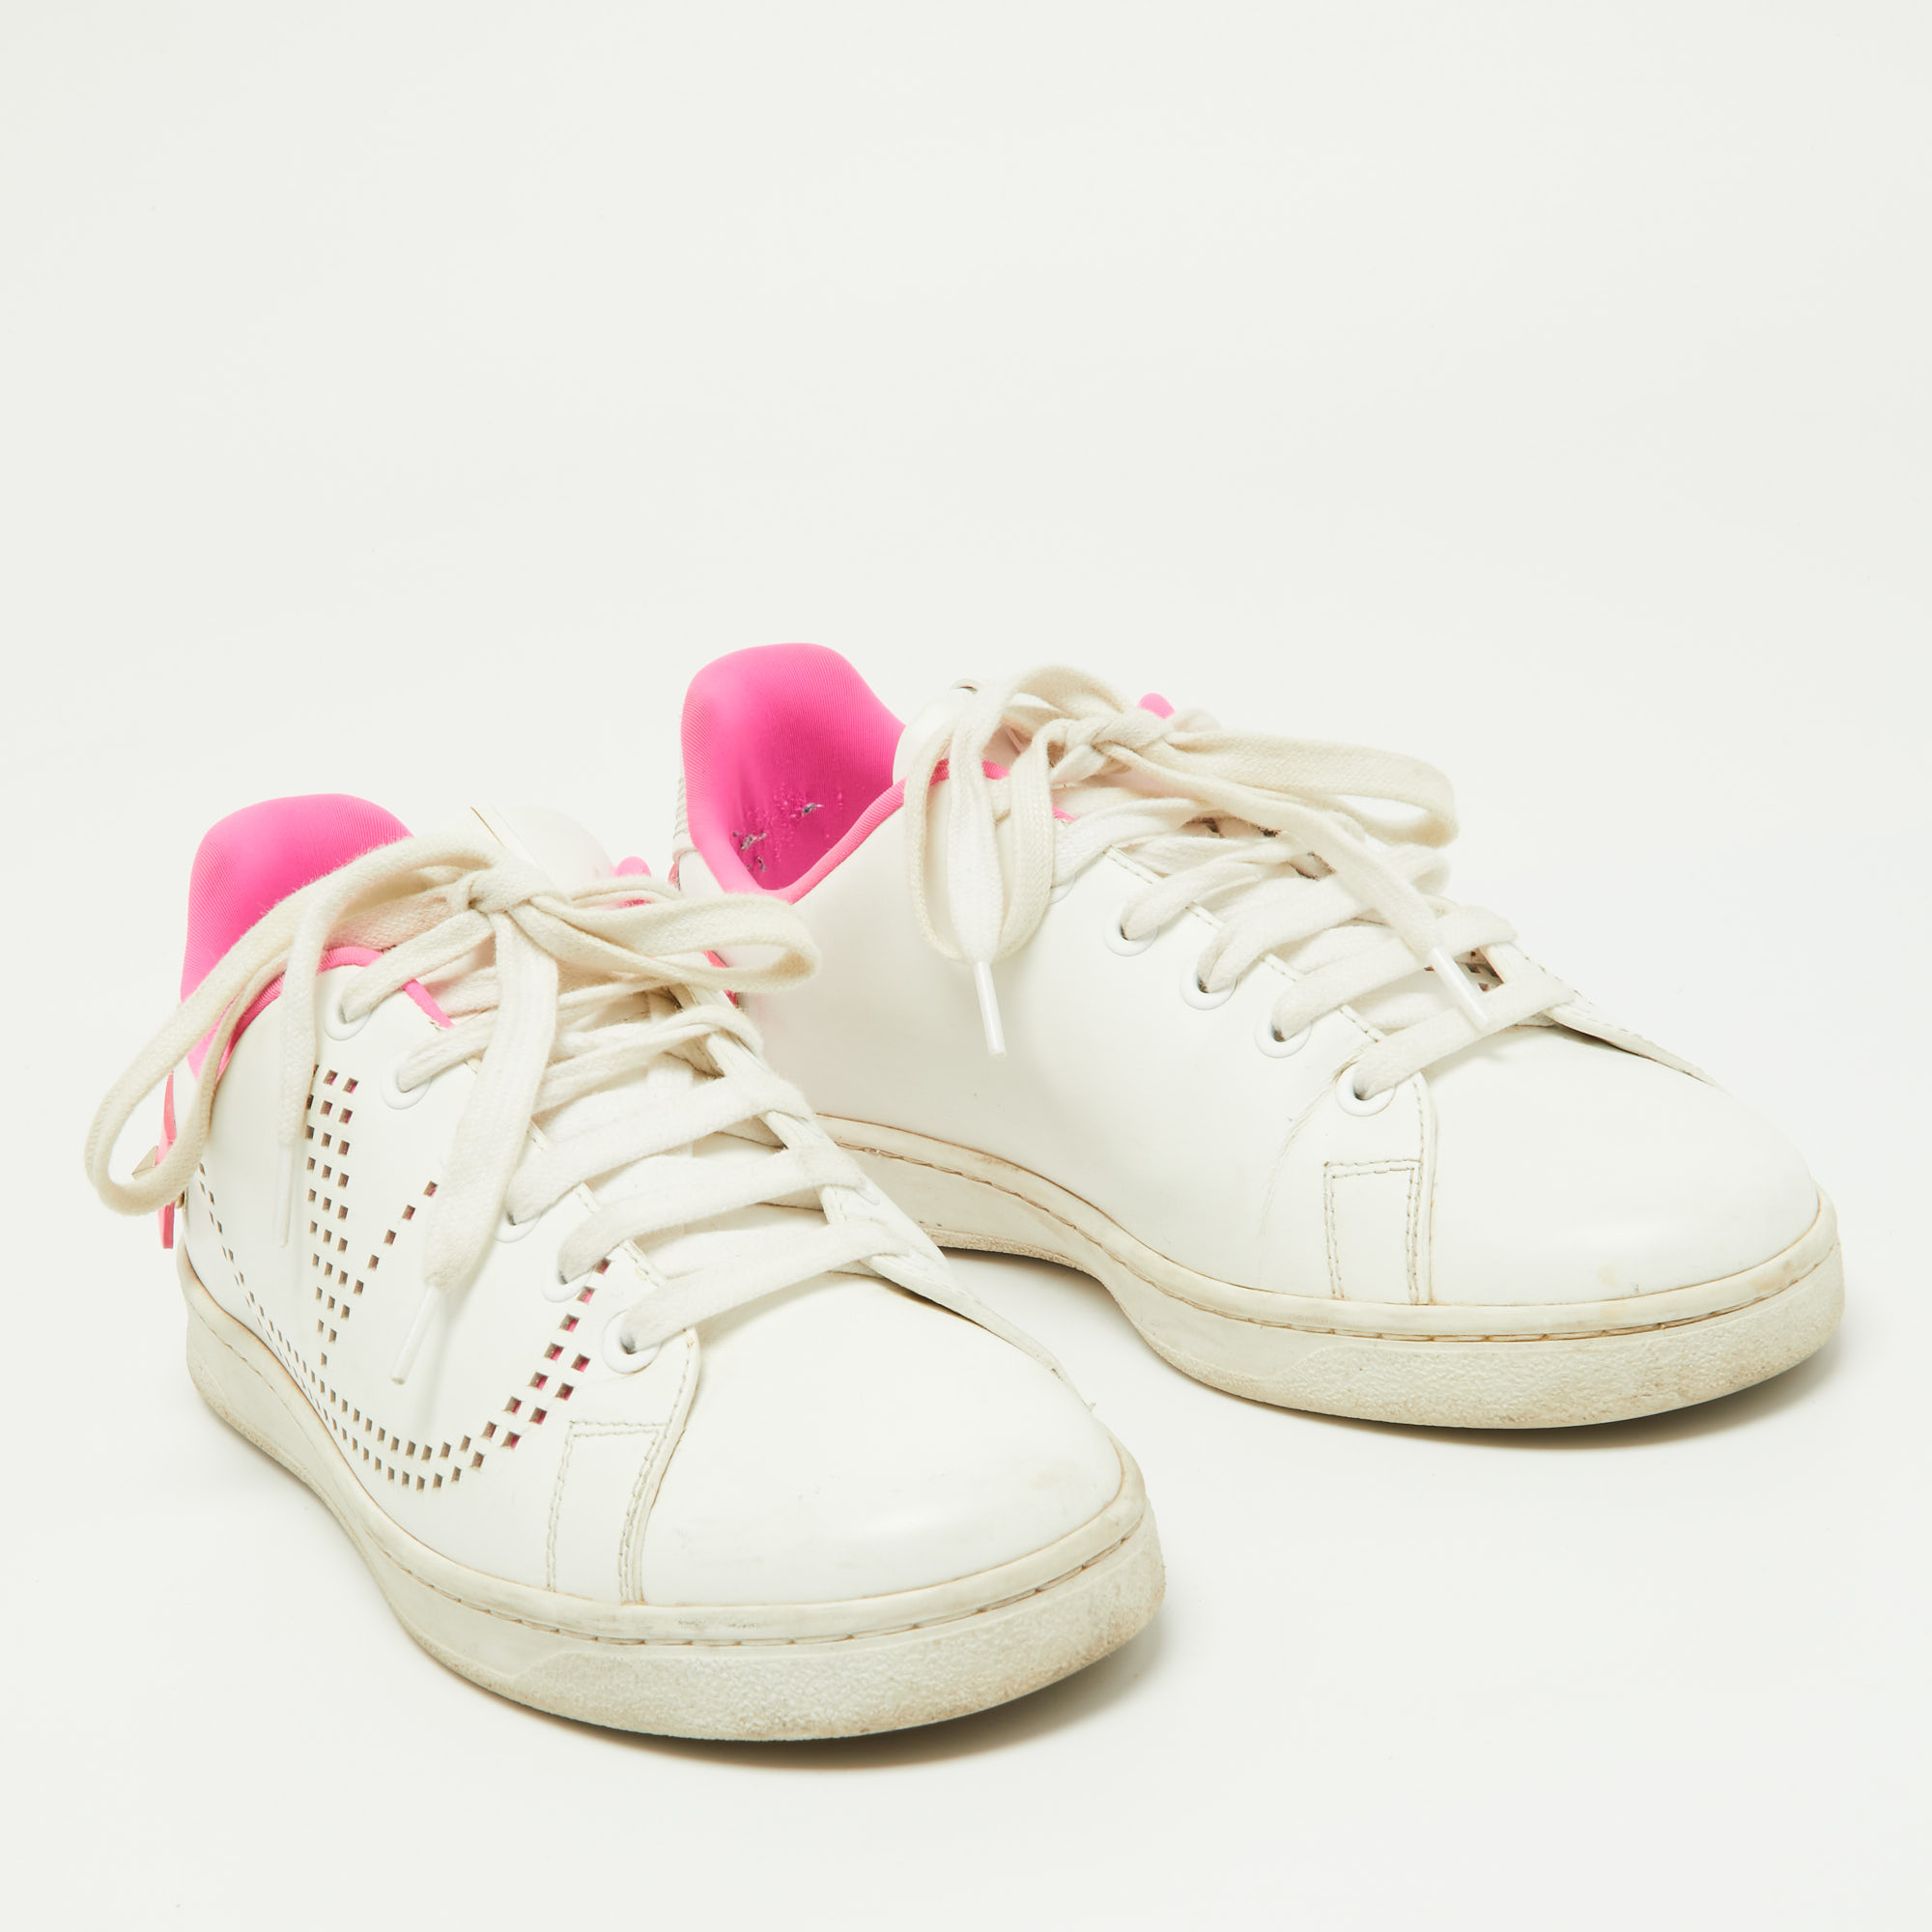 Valentino White Leather Vlogo Rockstud Low Top Sneakers Size 36